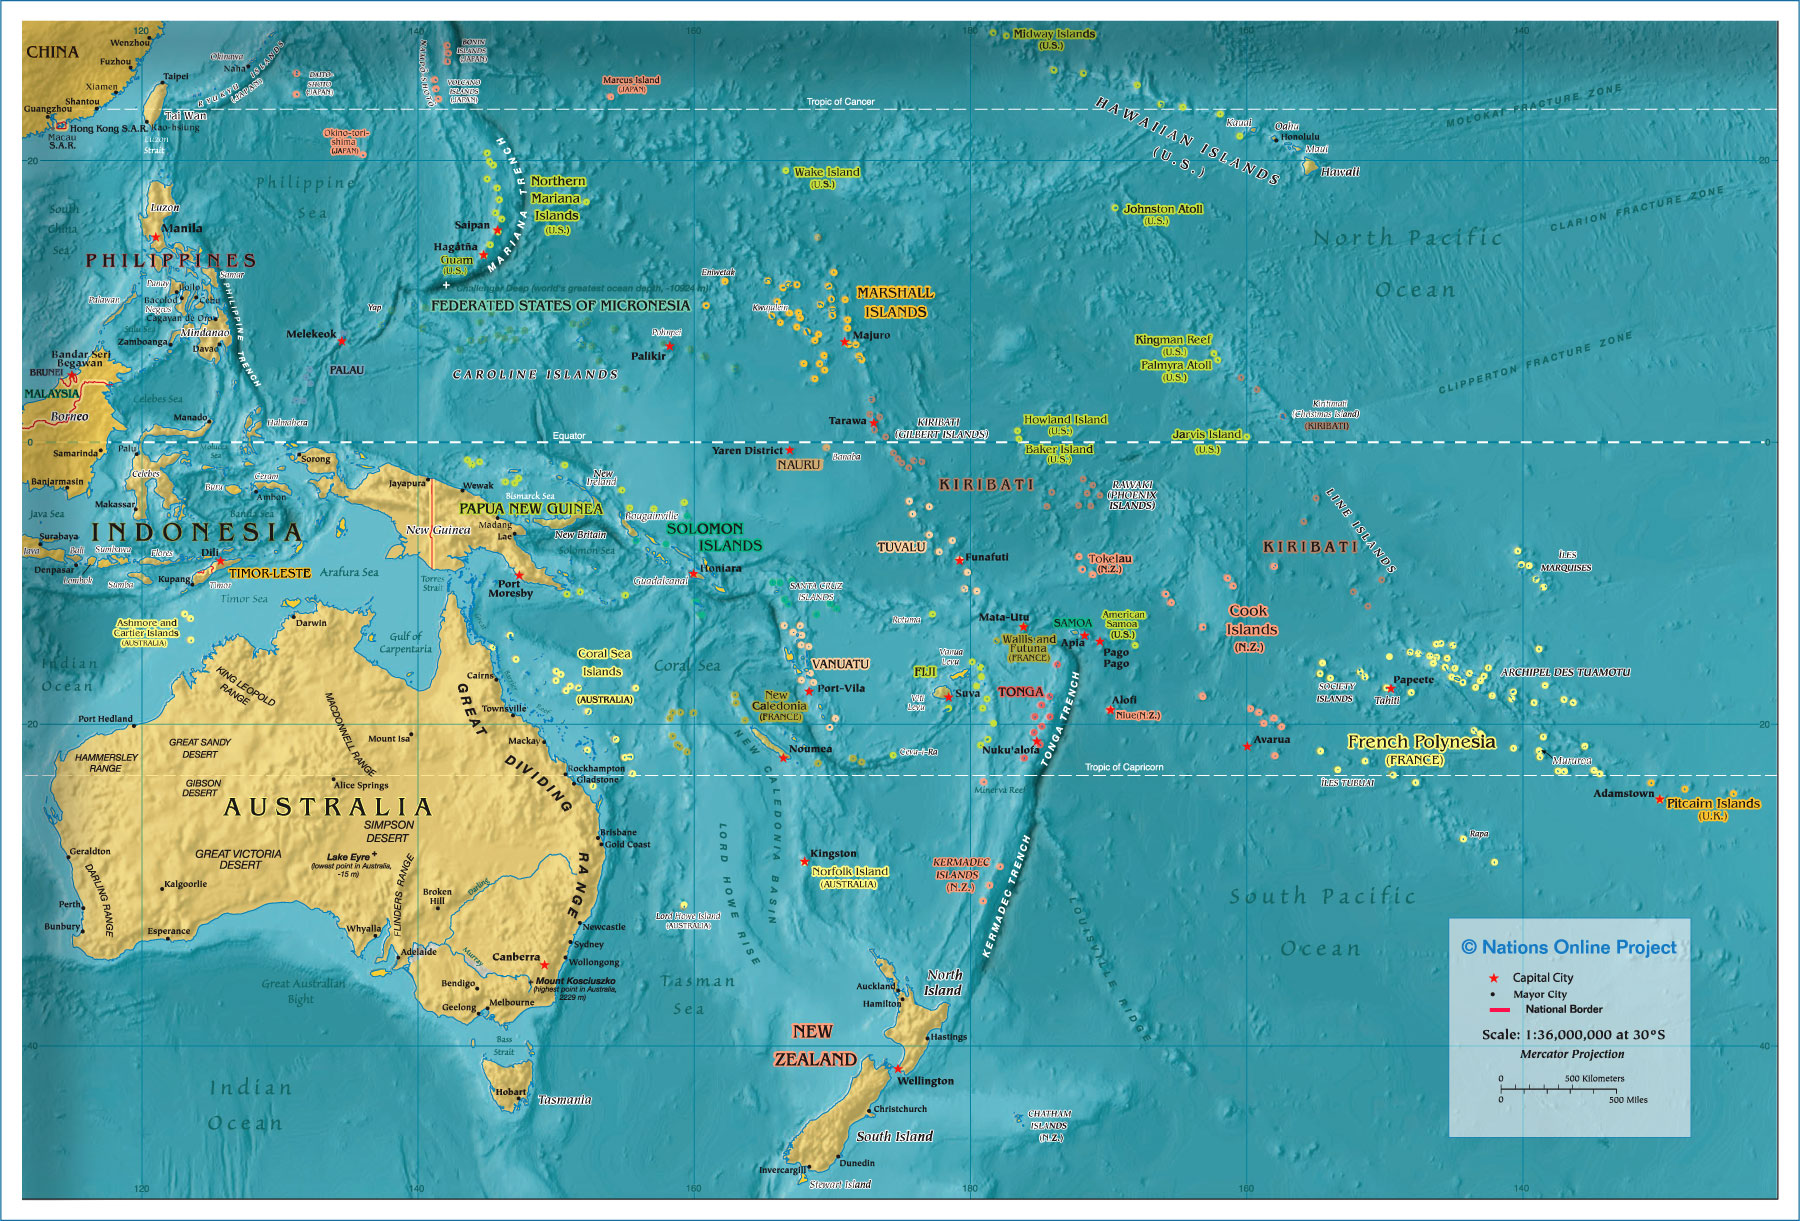 Political Map of Oceania/Australia - Nations Online Project